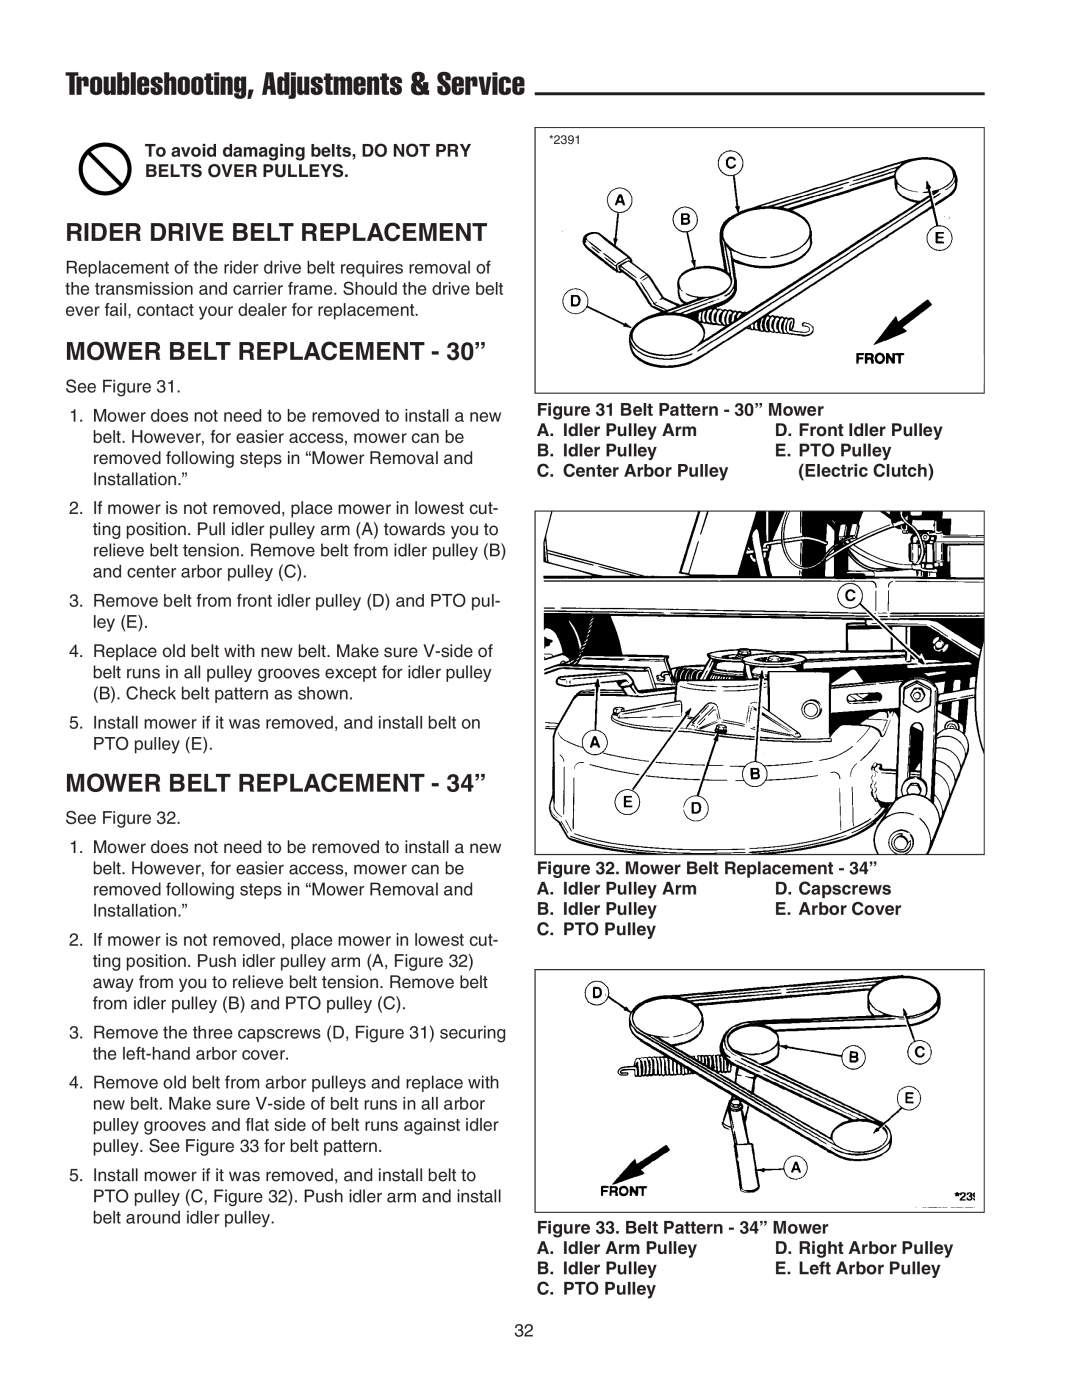 Snapper RE 200 manual Rider Drive Belt Replacement, MOWER BELT REPLACEMENT - 30”, MOWER BELT REPLACEMENT - 34” 